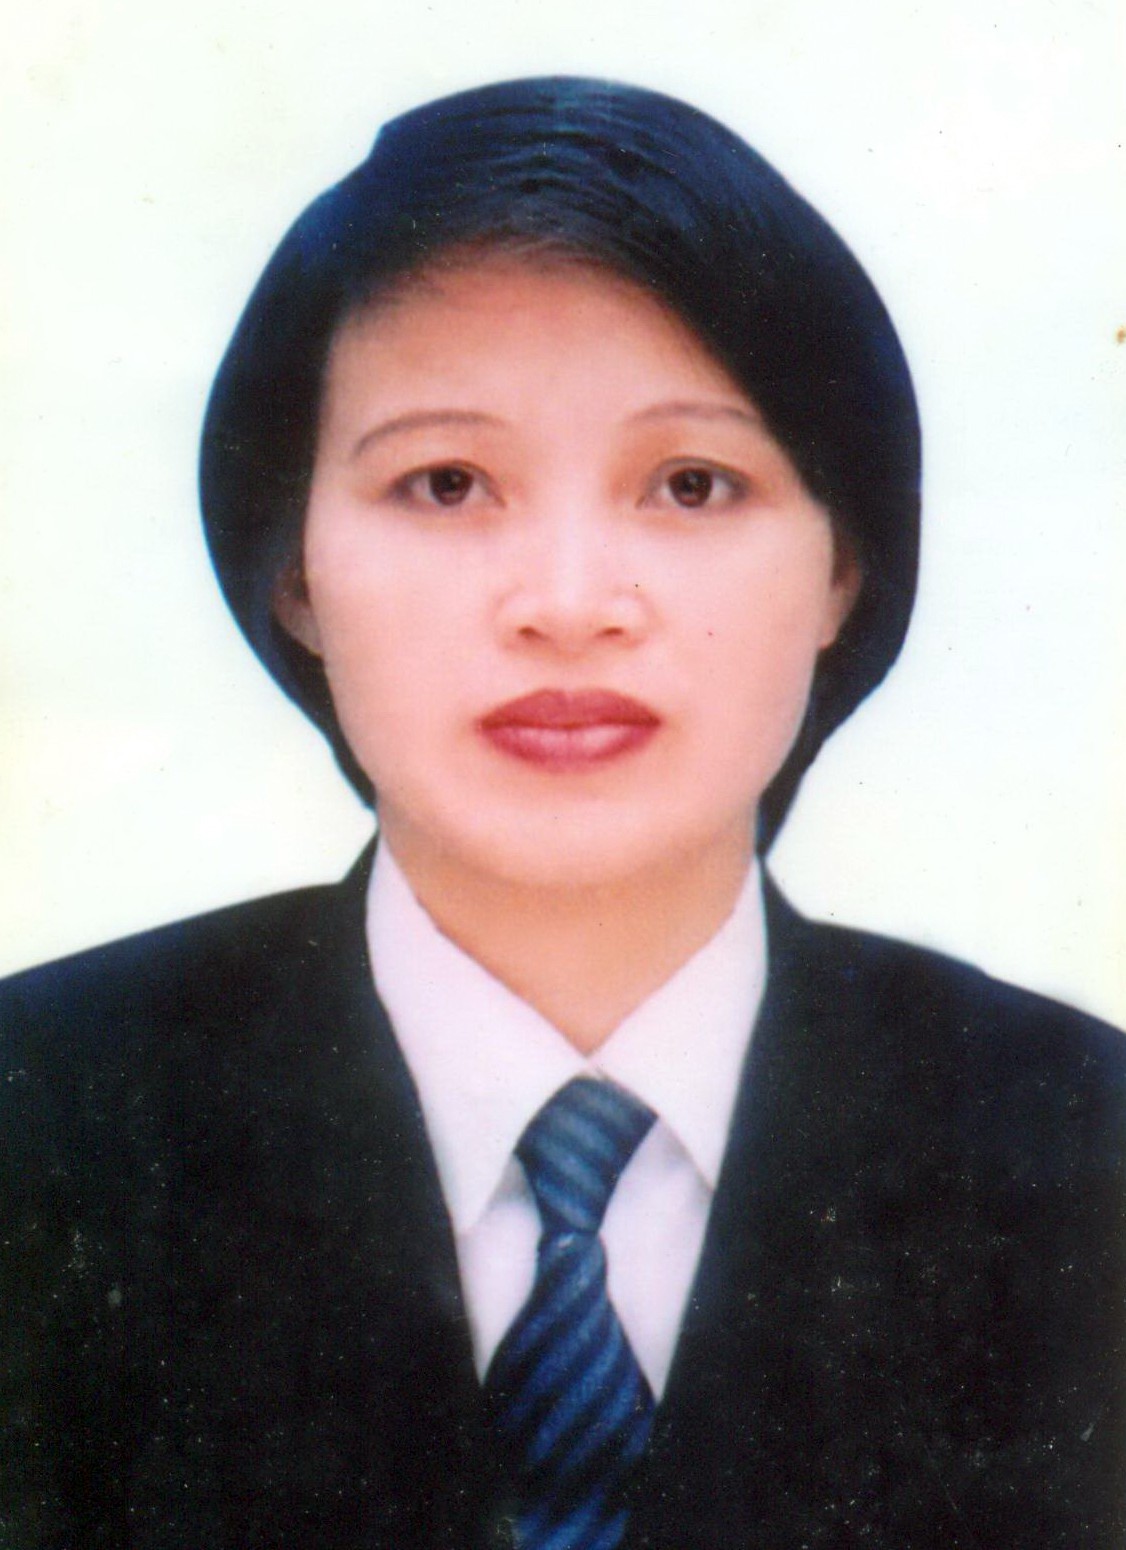 Nguyen Thi Kim Loan before the acid attack. Photo: Tuoi Tre